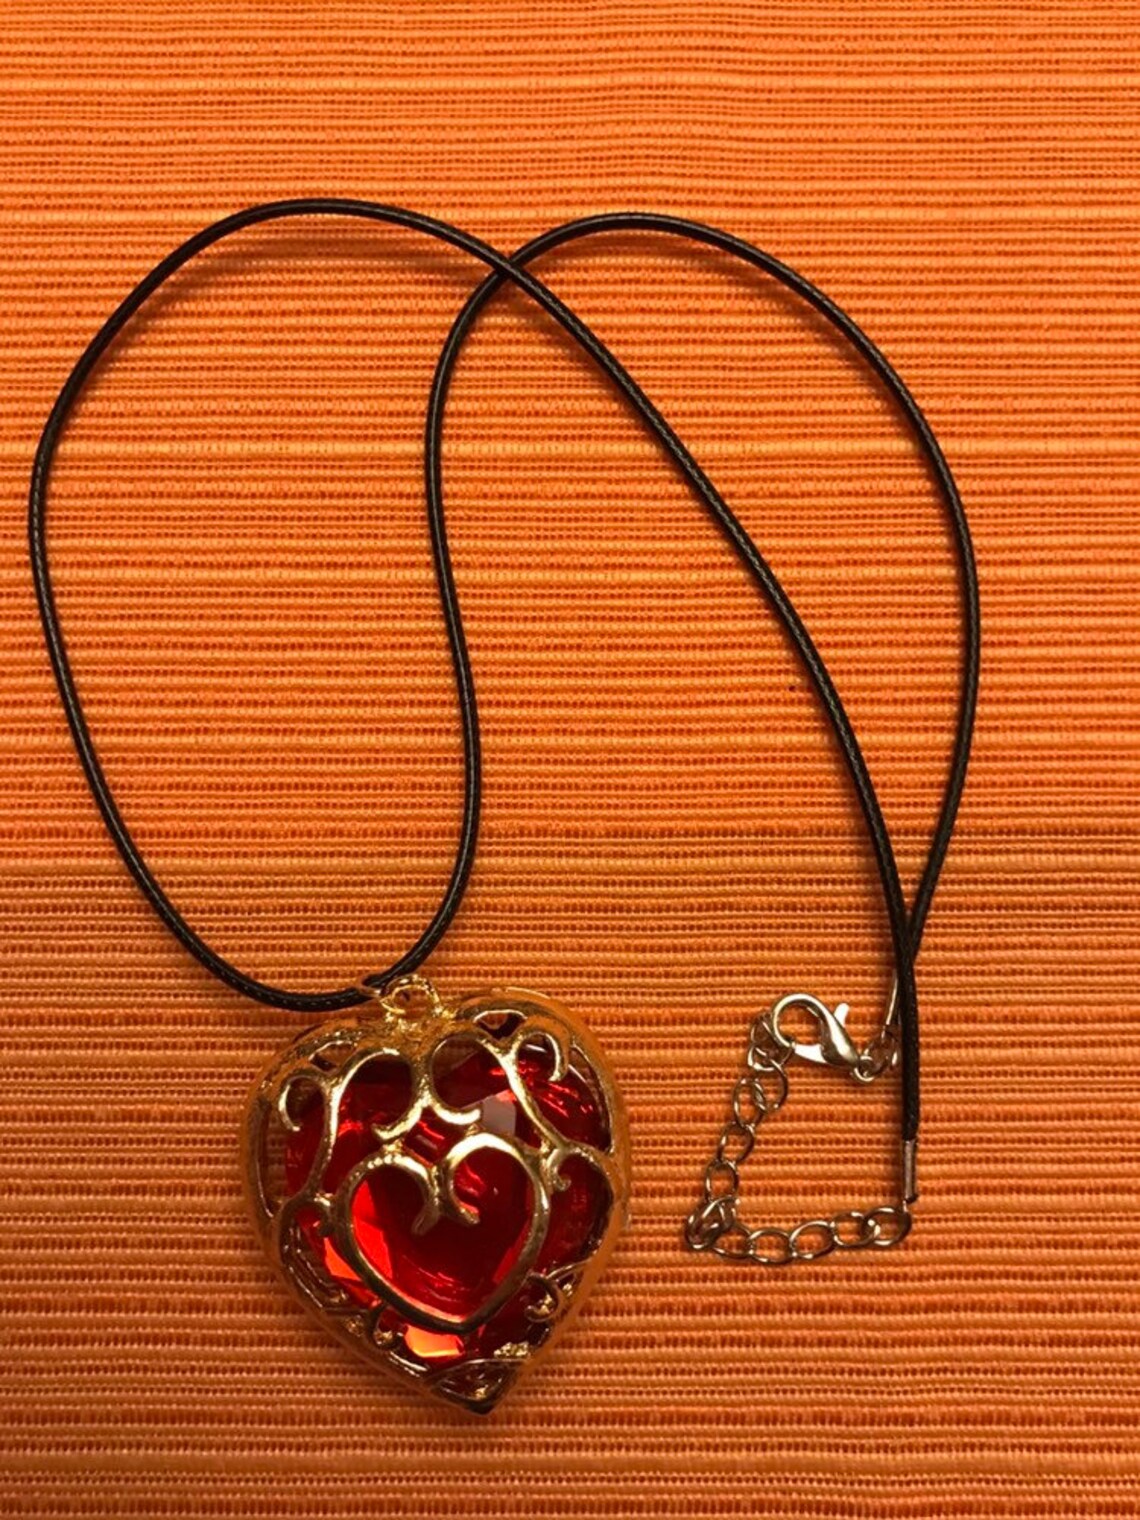 Zelda Breath of the Wild Heart Container Necklace - Etsy